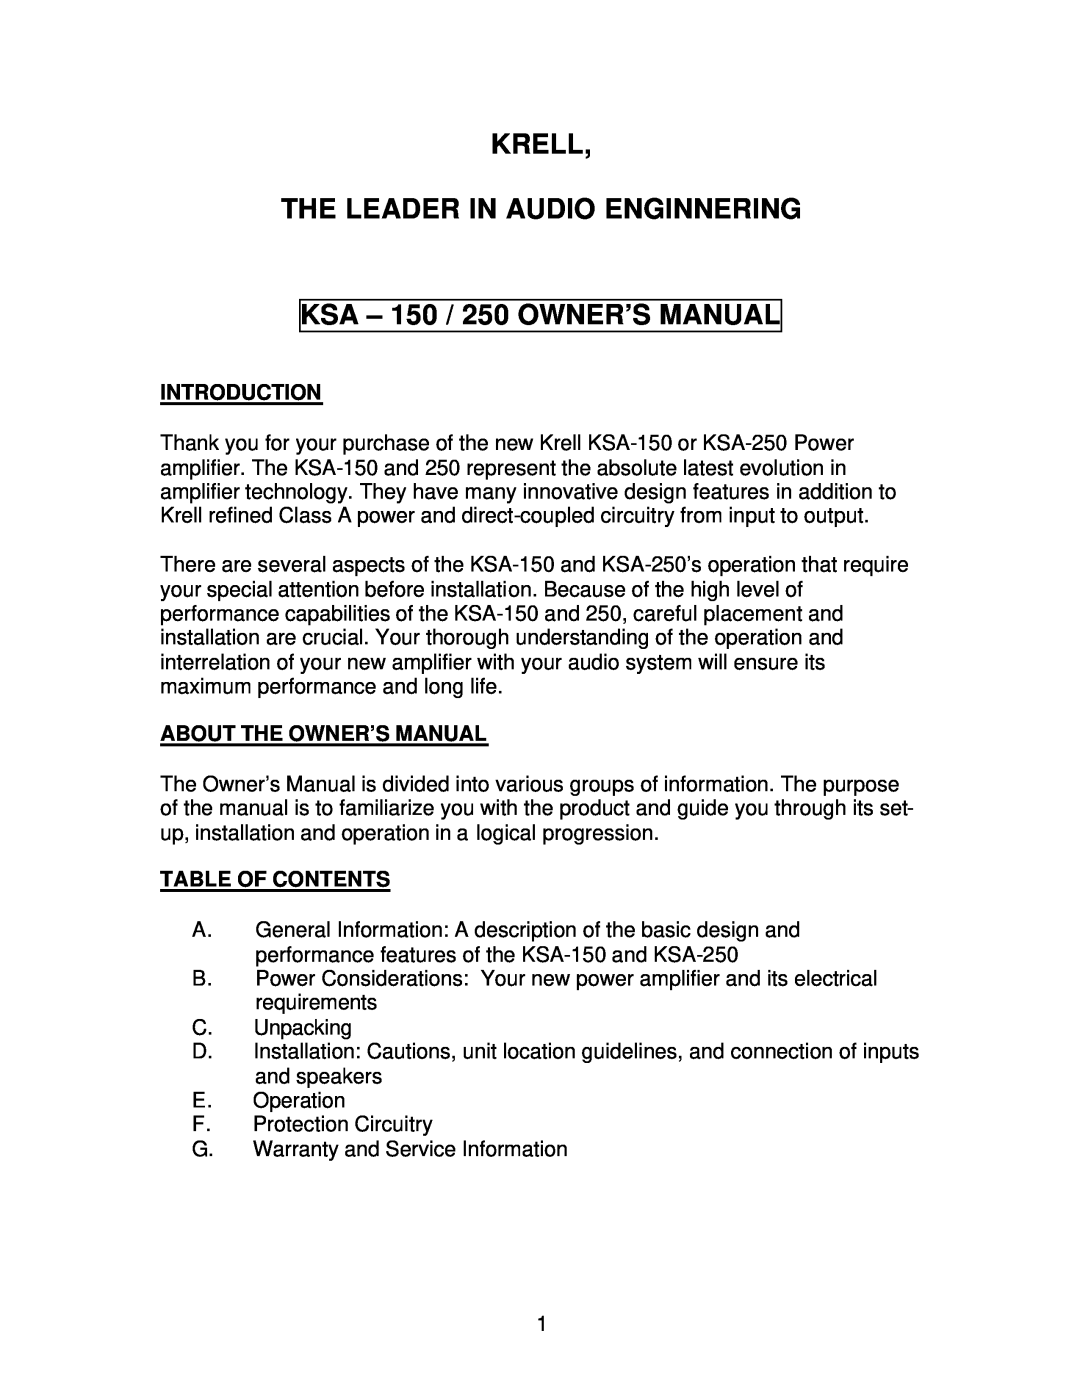 Krell Industries KSA 150 / 250 owner manual Introduction, Table Of Contents, Krell The Leader In Audio Enginnering 